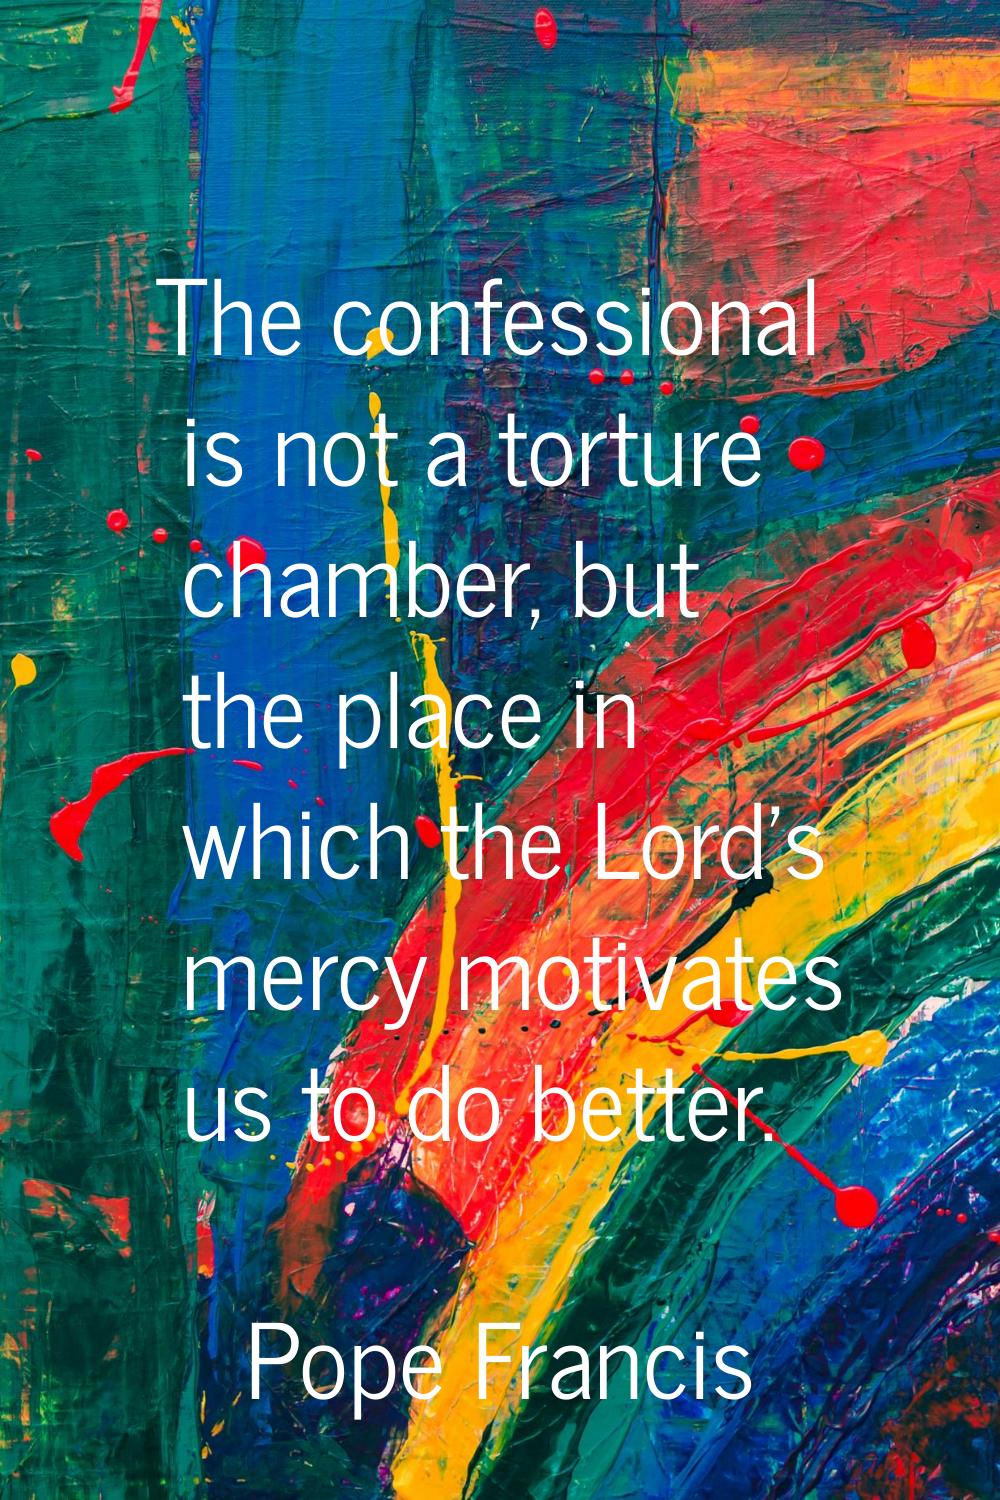 The confessional is not a torture chamber, but the place in which the Lord's mercy motivates us to 